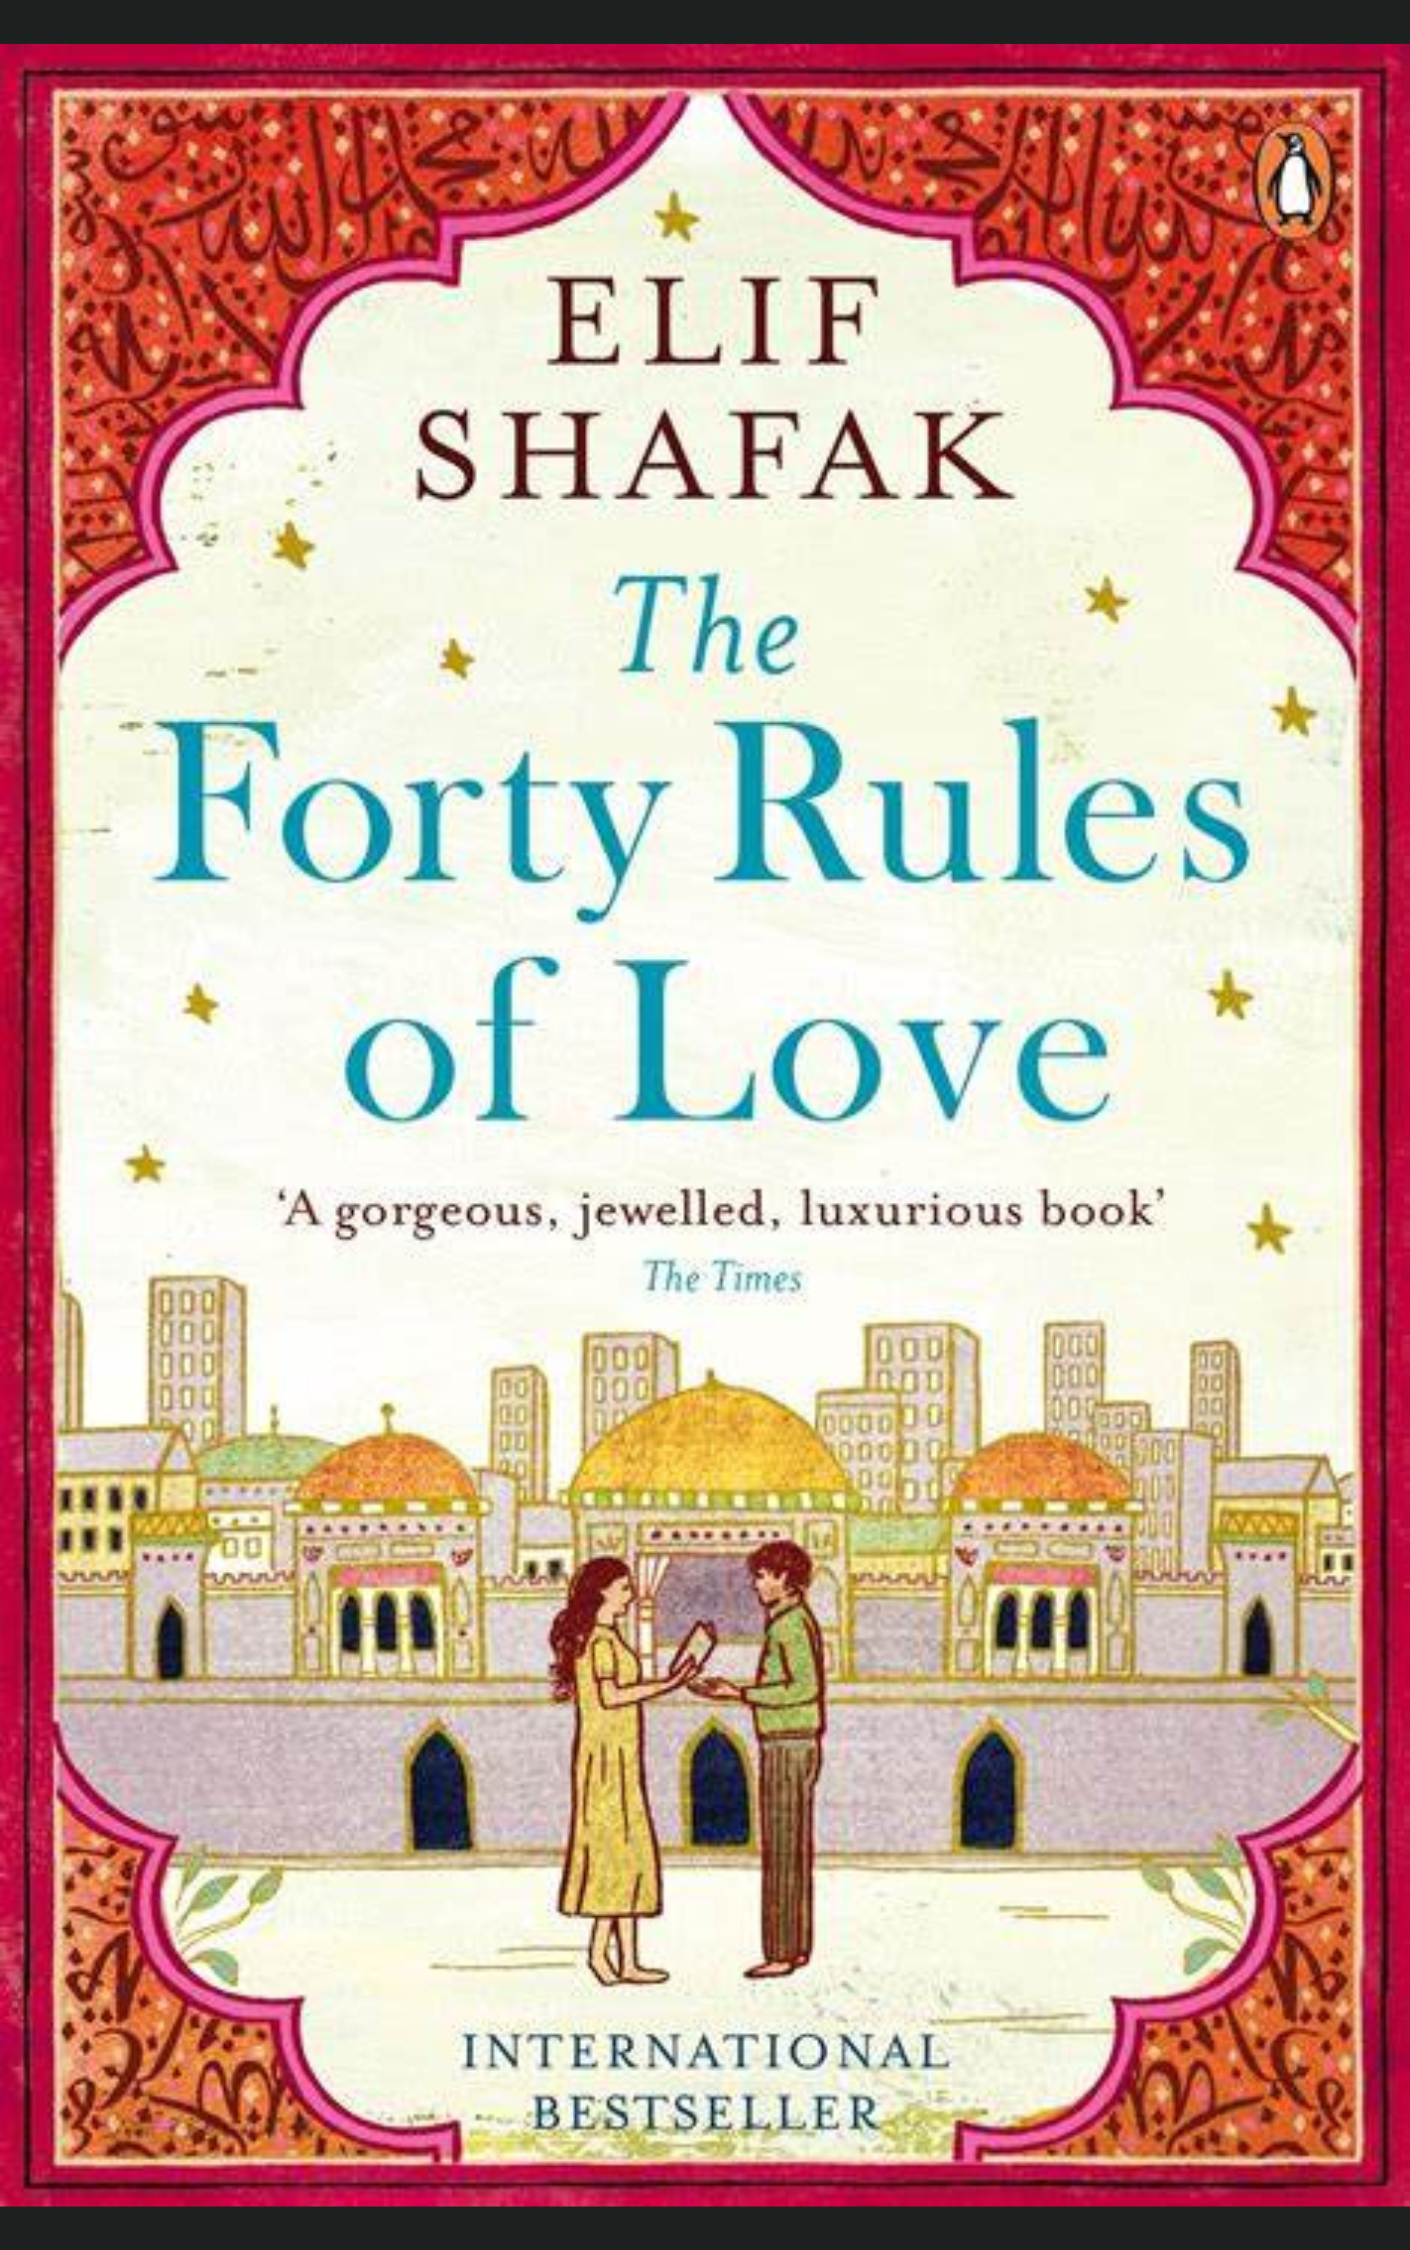 THE FORTY RULES OF LOVE by ELIF SHAFAK